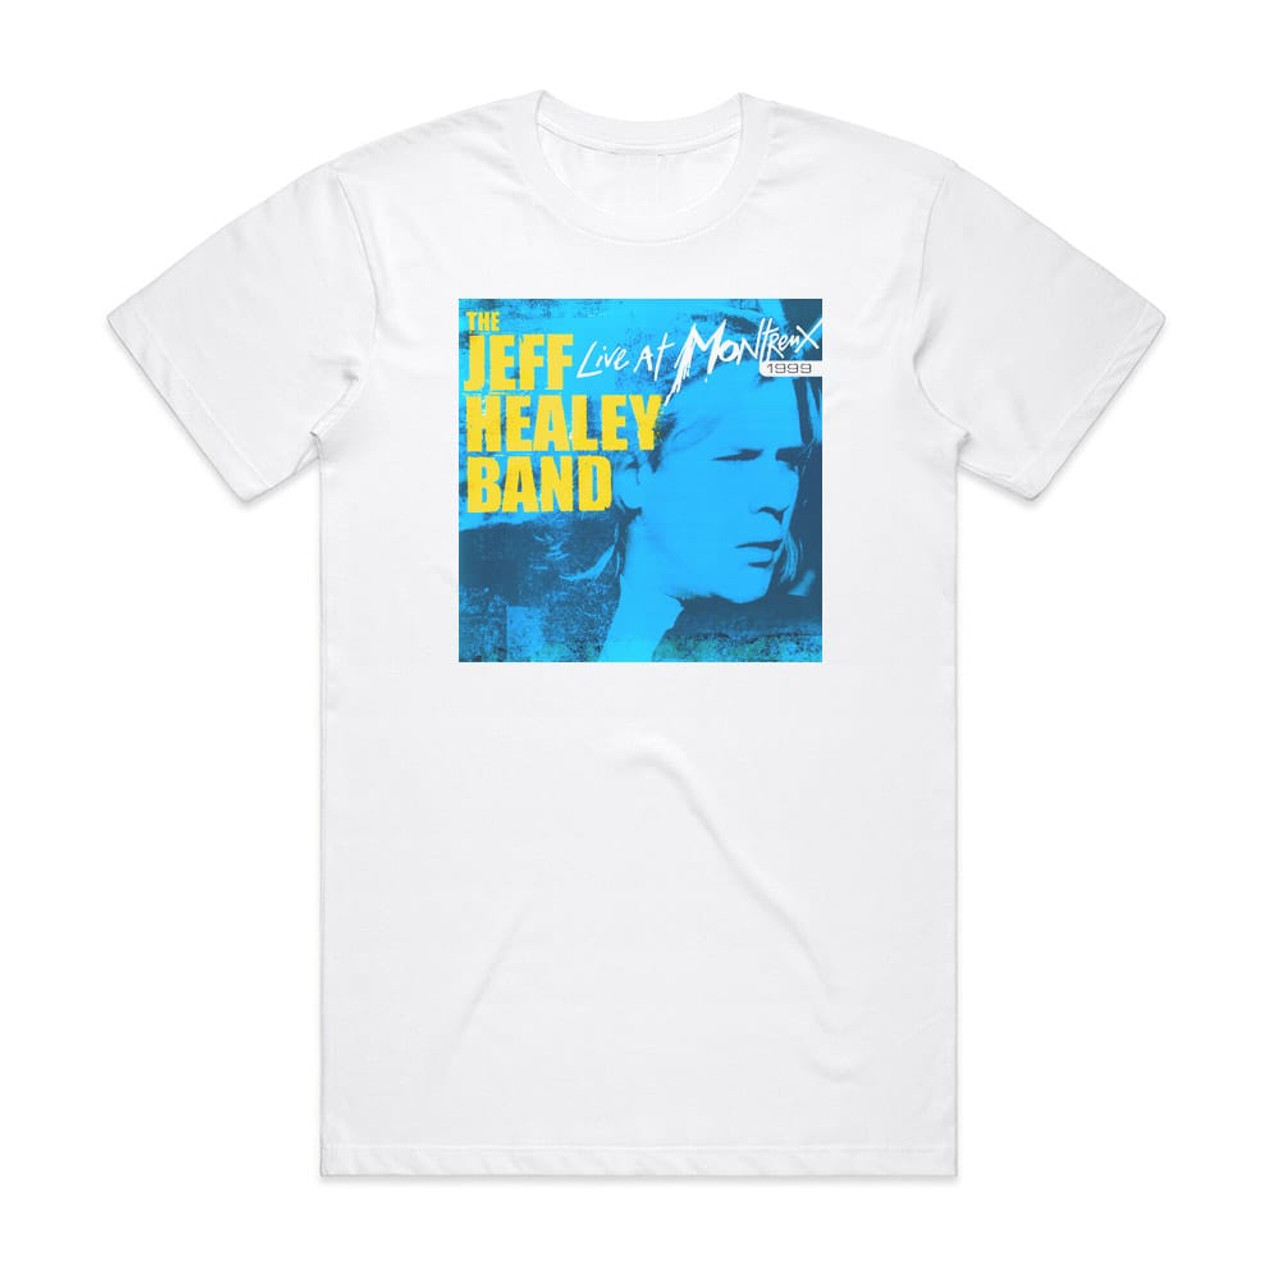 The Jeff Healey Band Live At Montreux 1999 Album Cover T-Shirt White